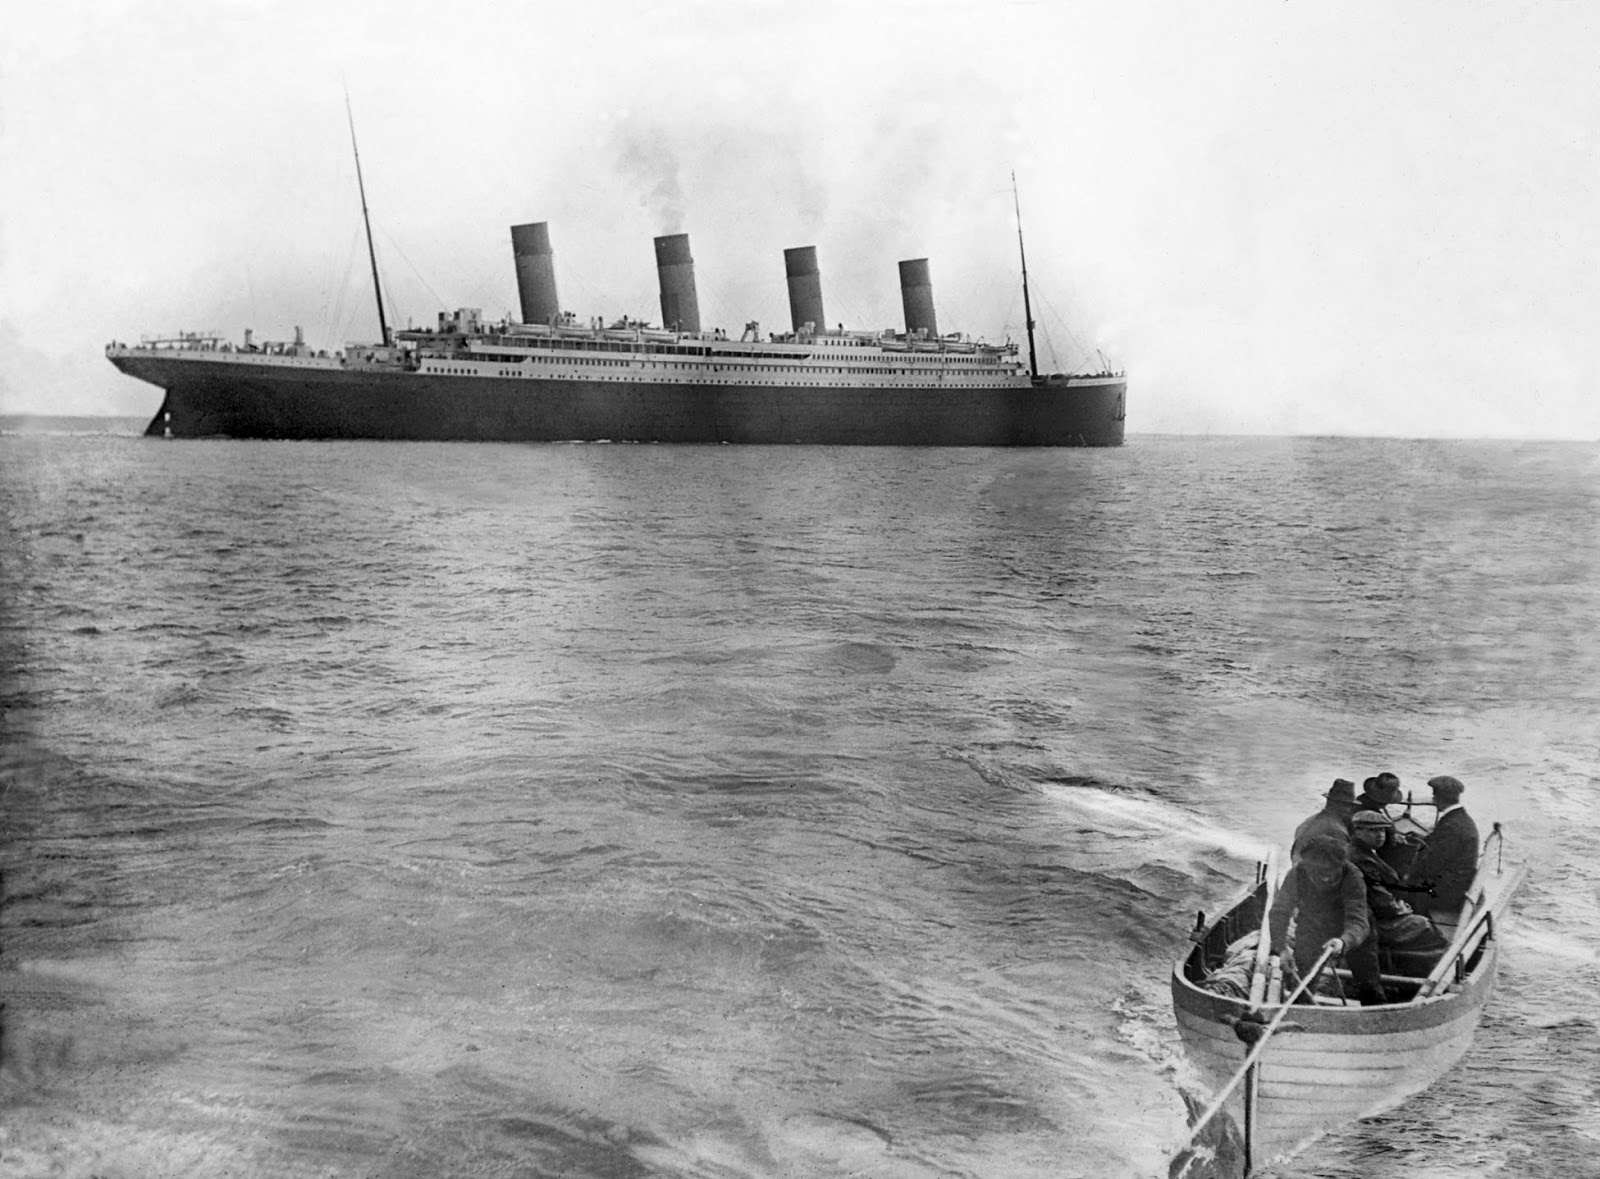 The last photo of the Titanic afloat.